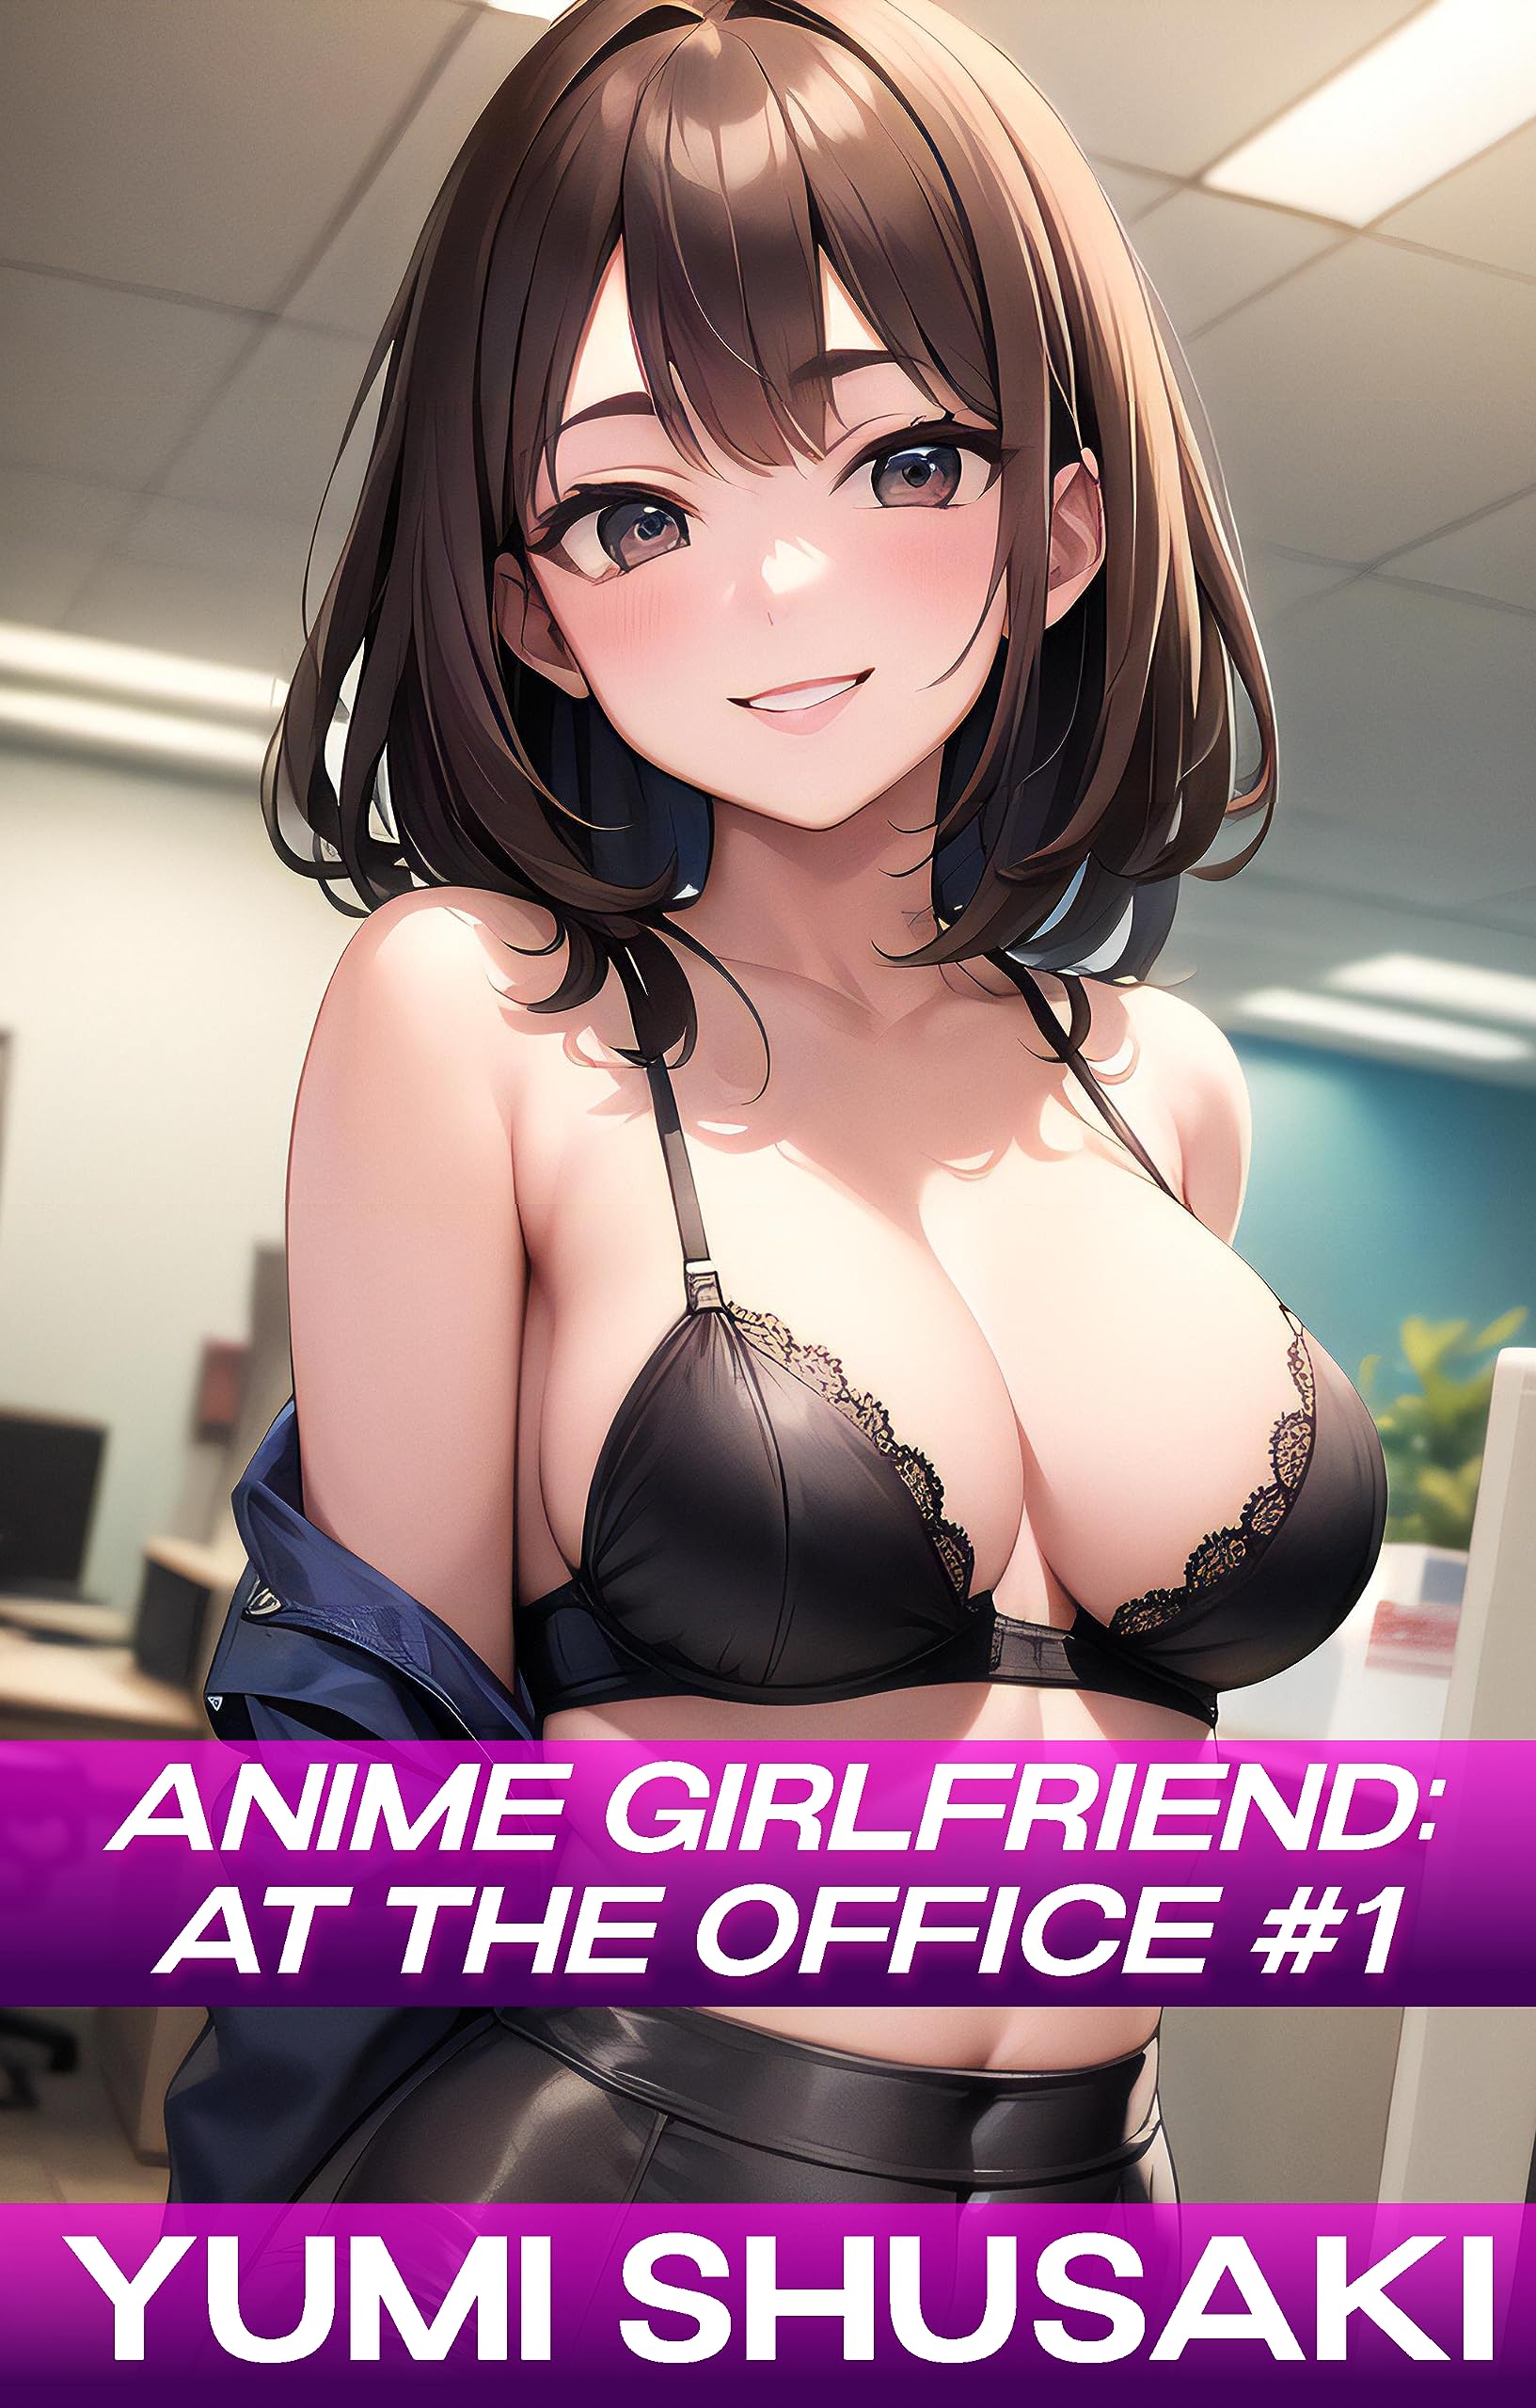 denise laino recommends pictures of sexy anime girls pic